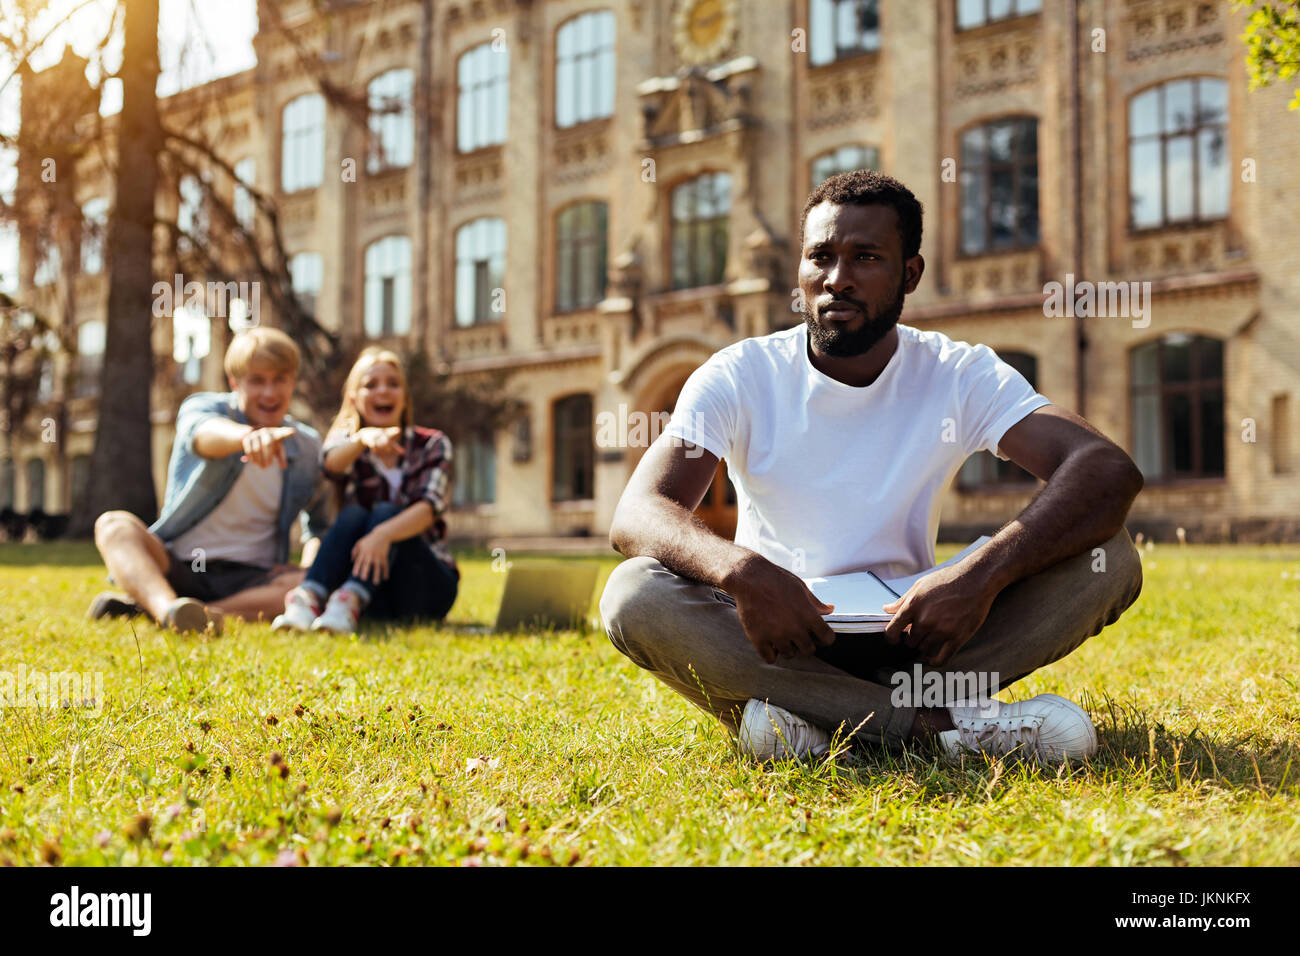 Young African American feeling like an outsider Stock Photo